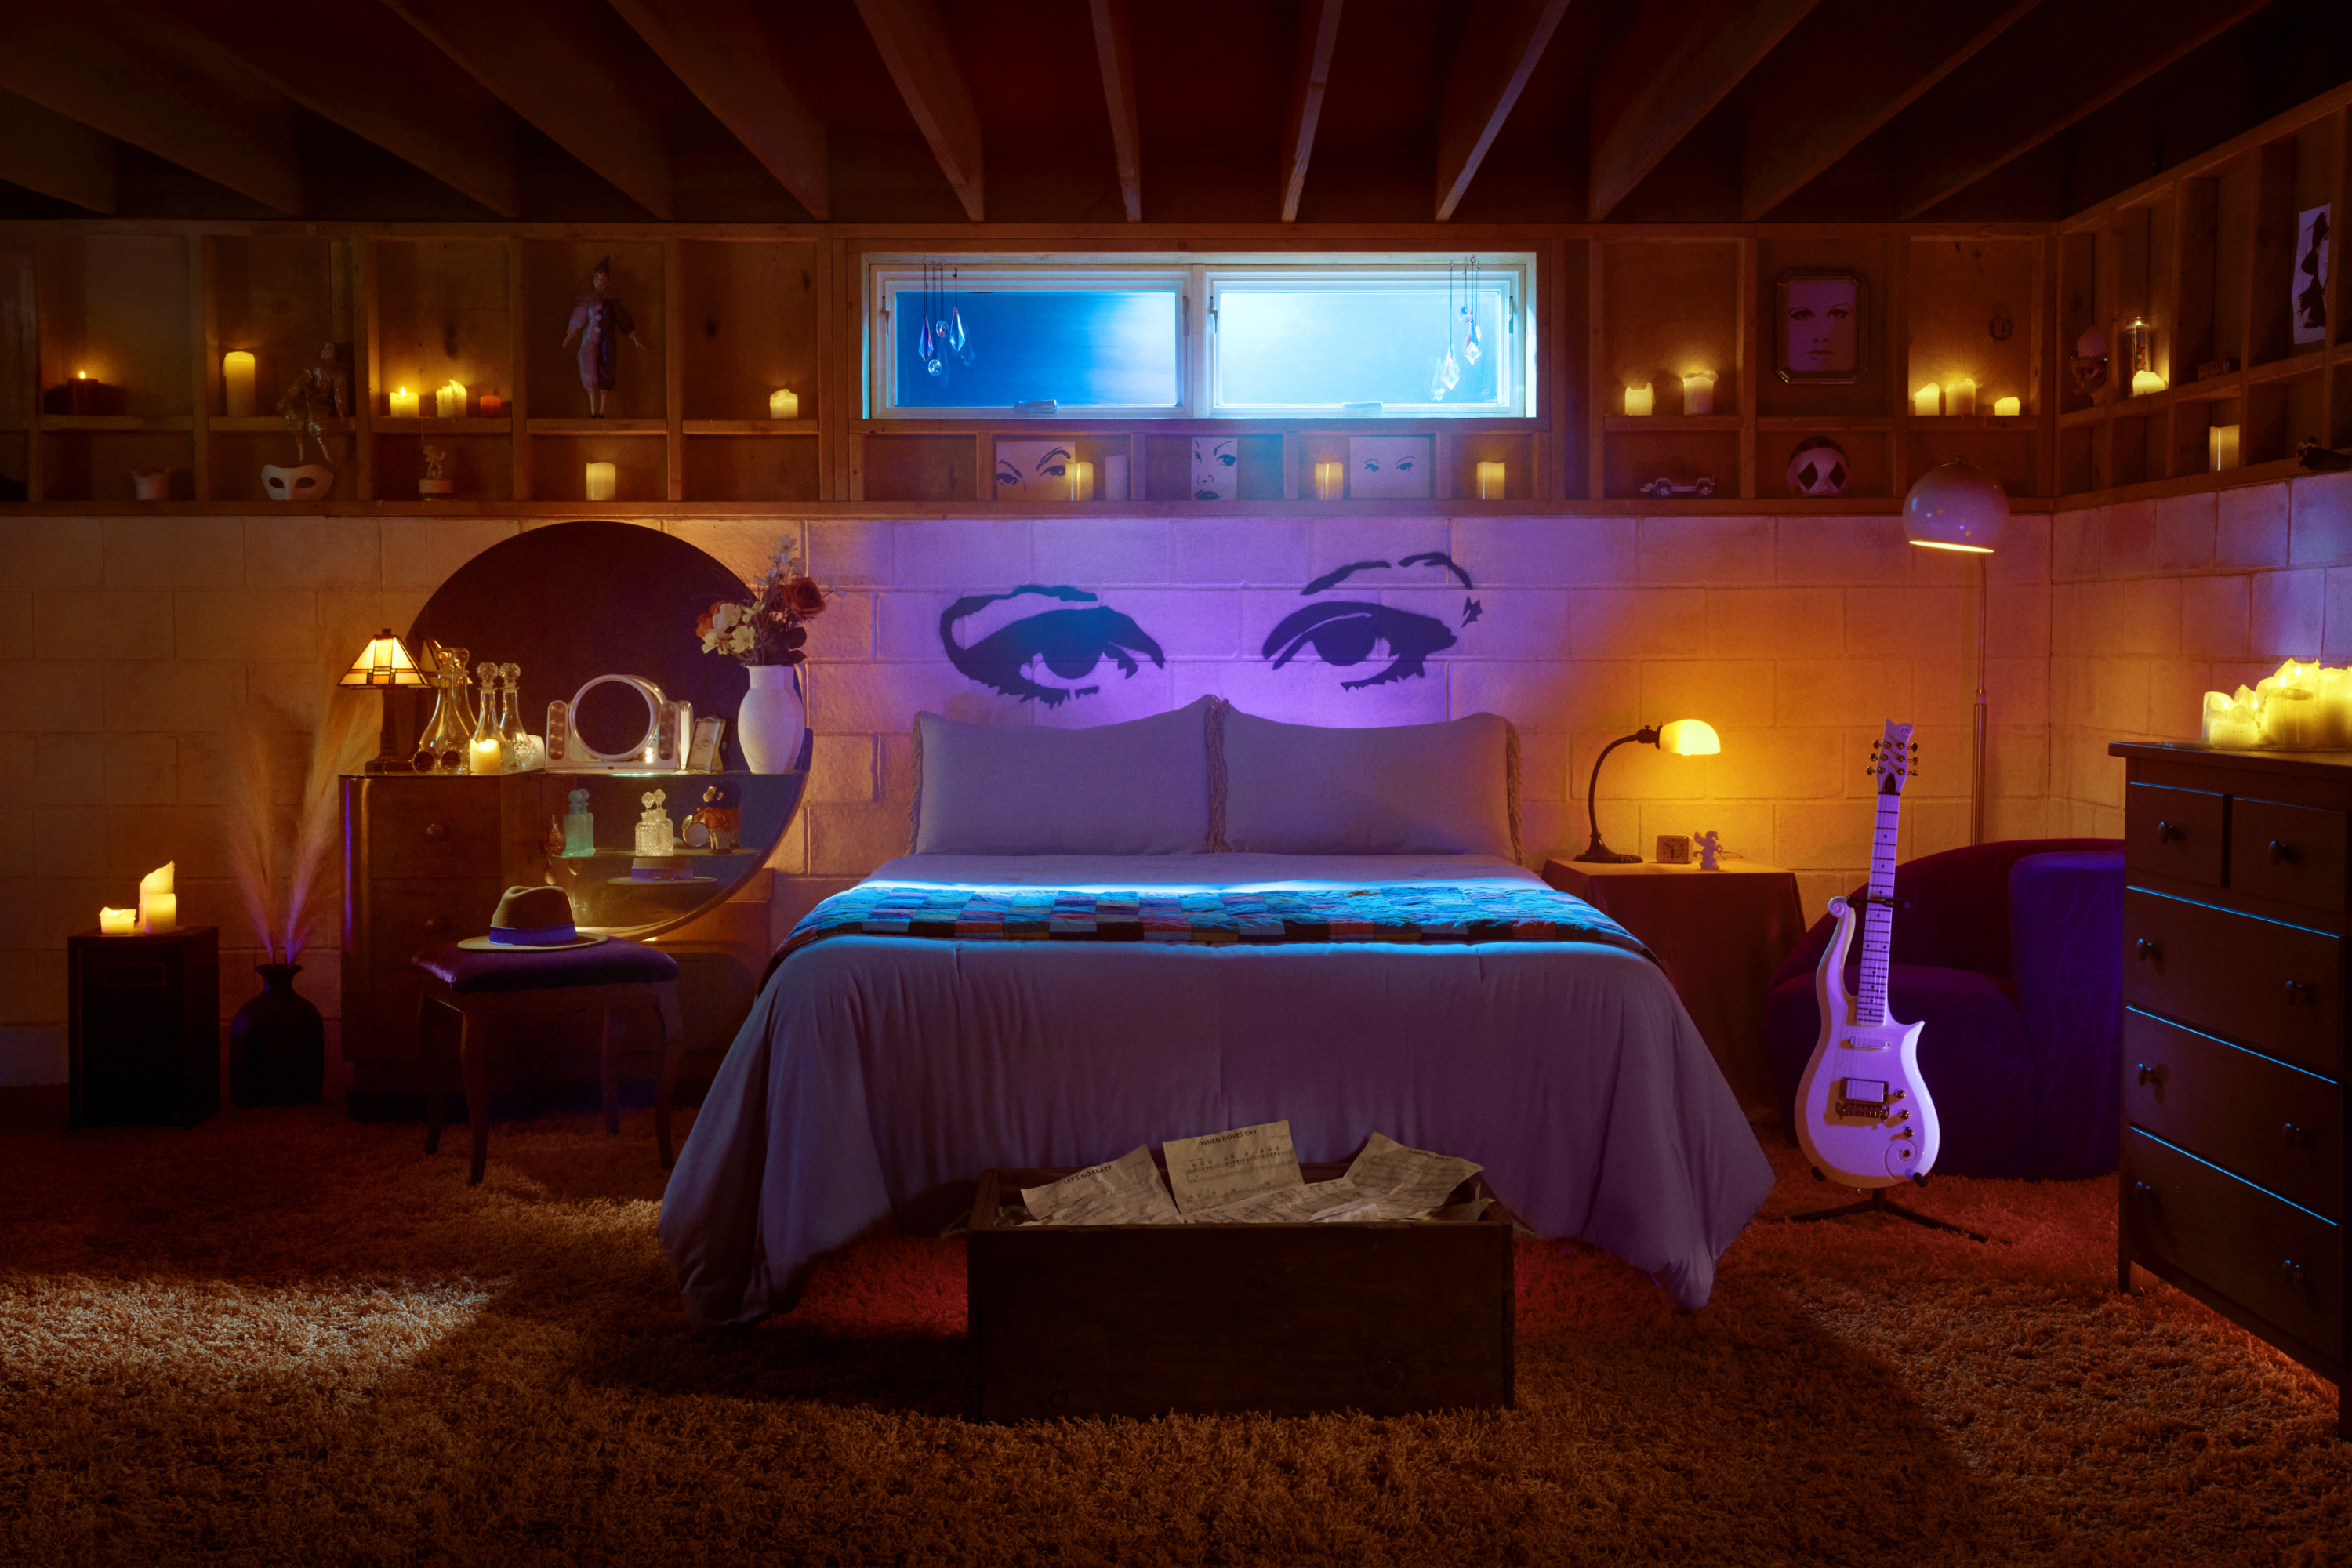 Basement bedroom with a white guitar nearby, backed by spray painted eyes above the pillows. 